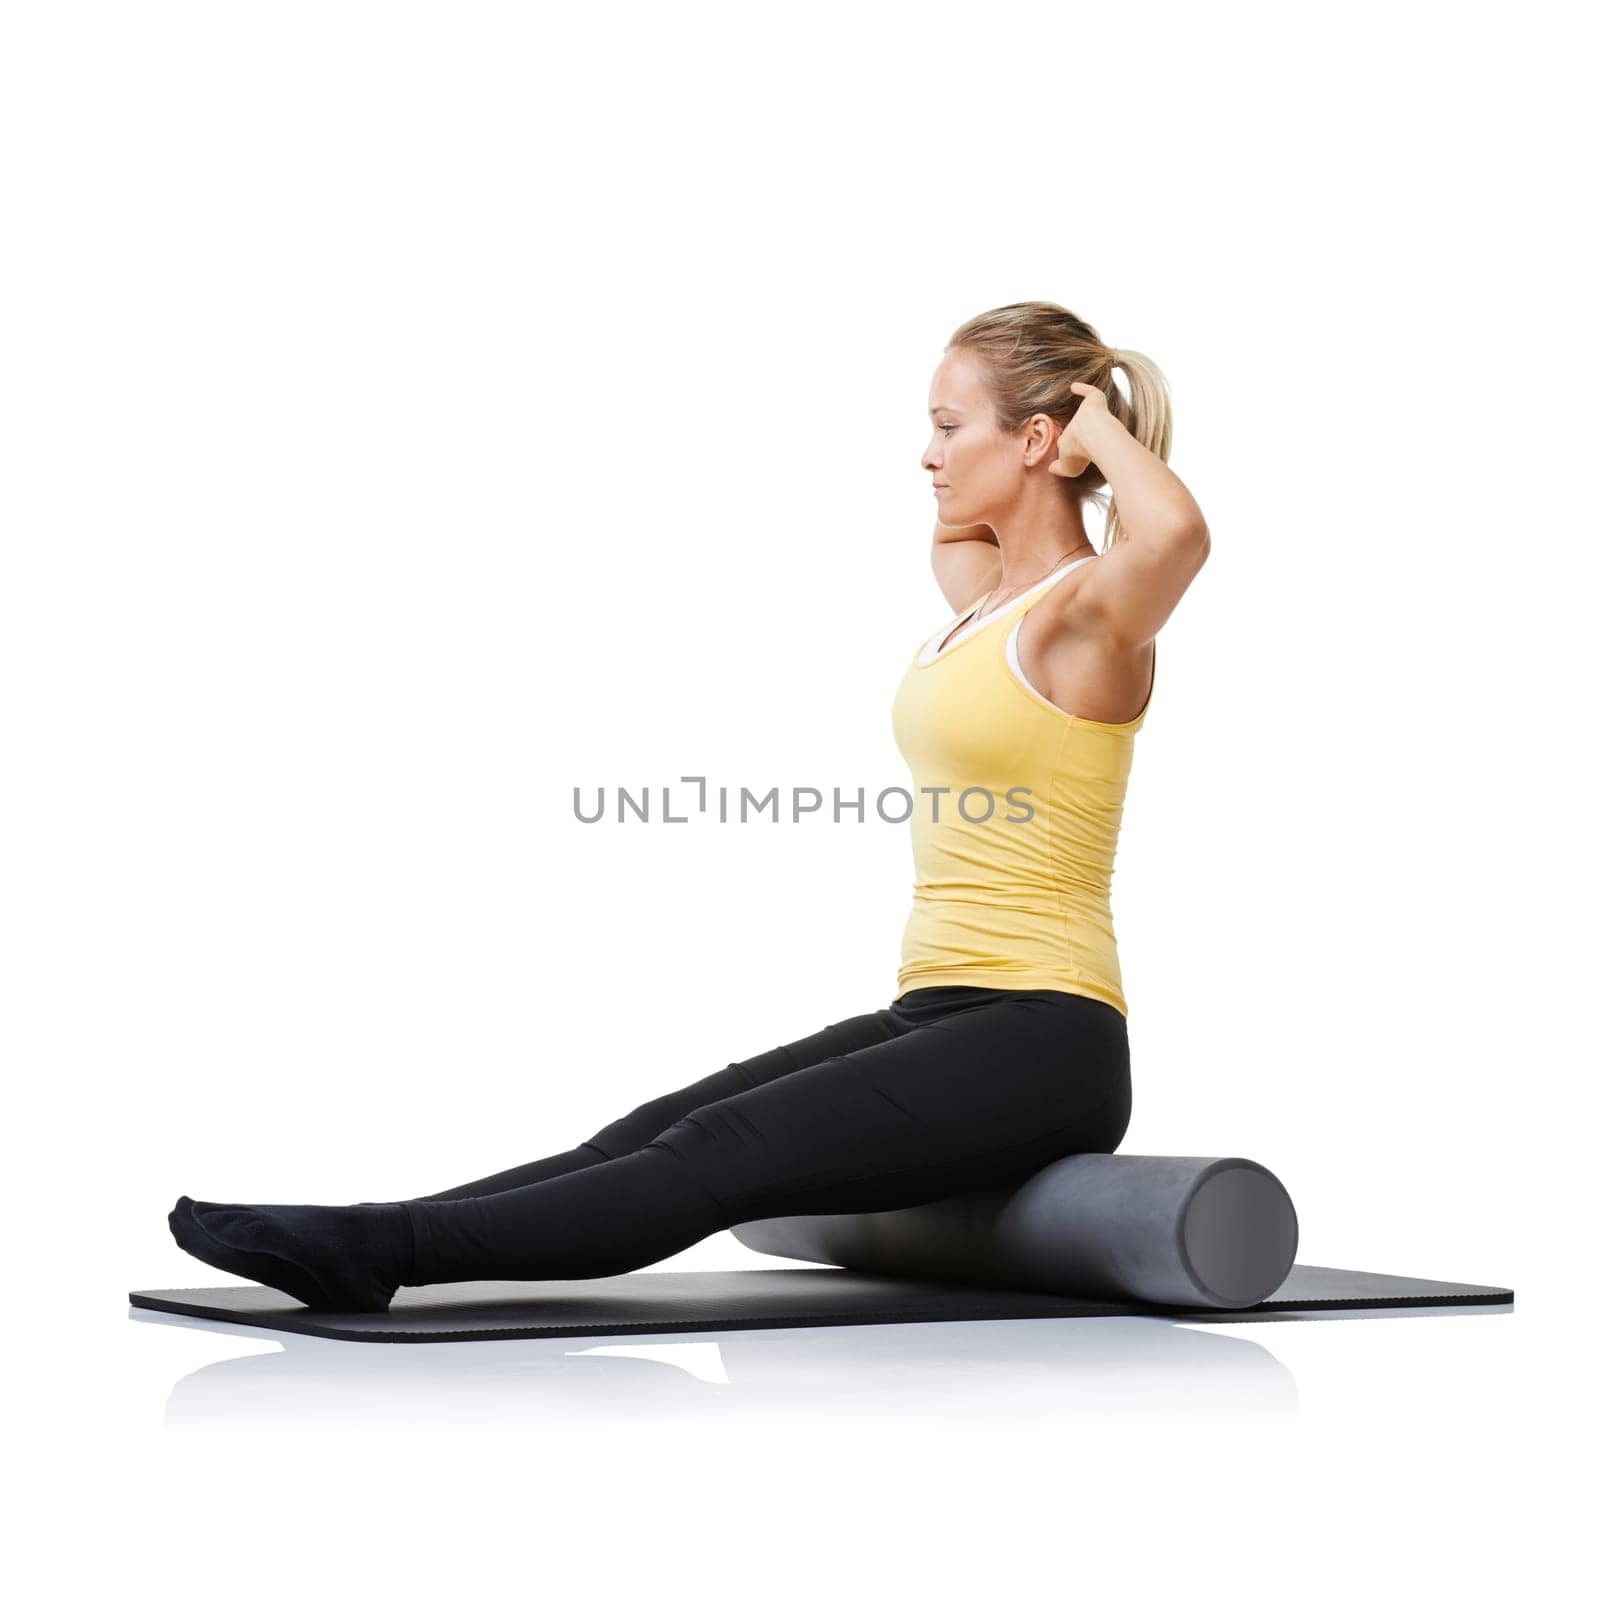 Studio fitness, foam roller and pilates woman with posture training, core wellness challenge or active stretching exercise. Ground, yoga mat and profile of physical activity girl on white background by YuriArcurs